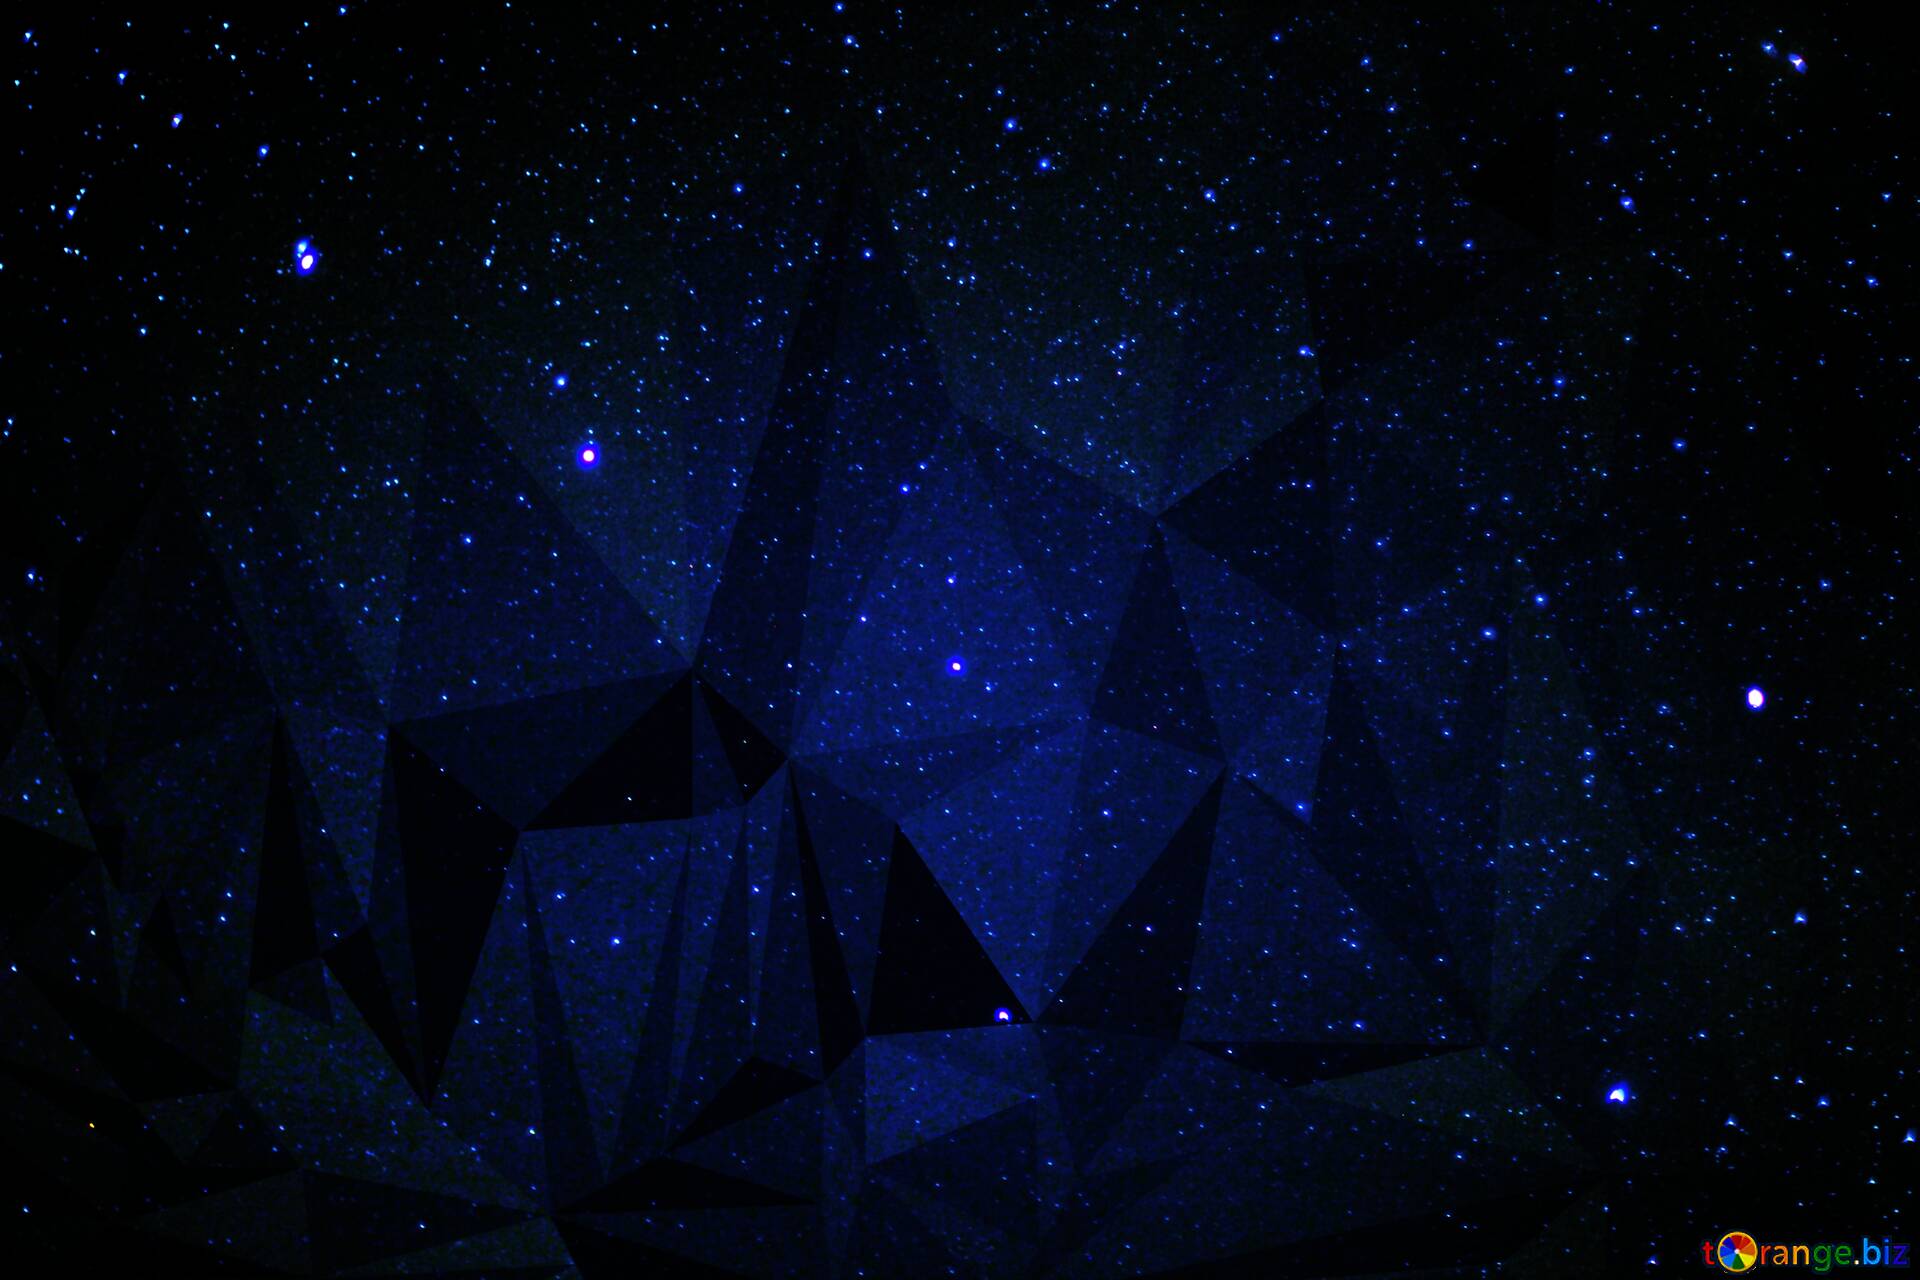 Download free picture Stars sky polygonal background dark blue on CC-BY  License ~ Free Image Stock  ~ fx №206810